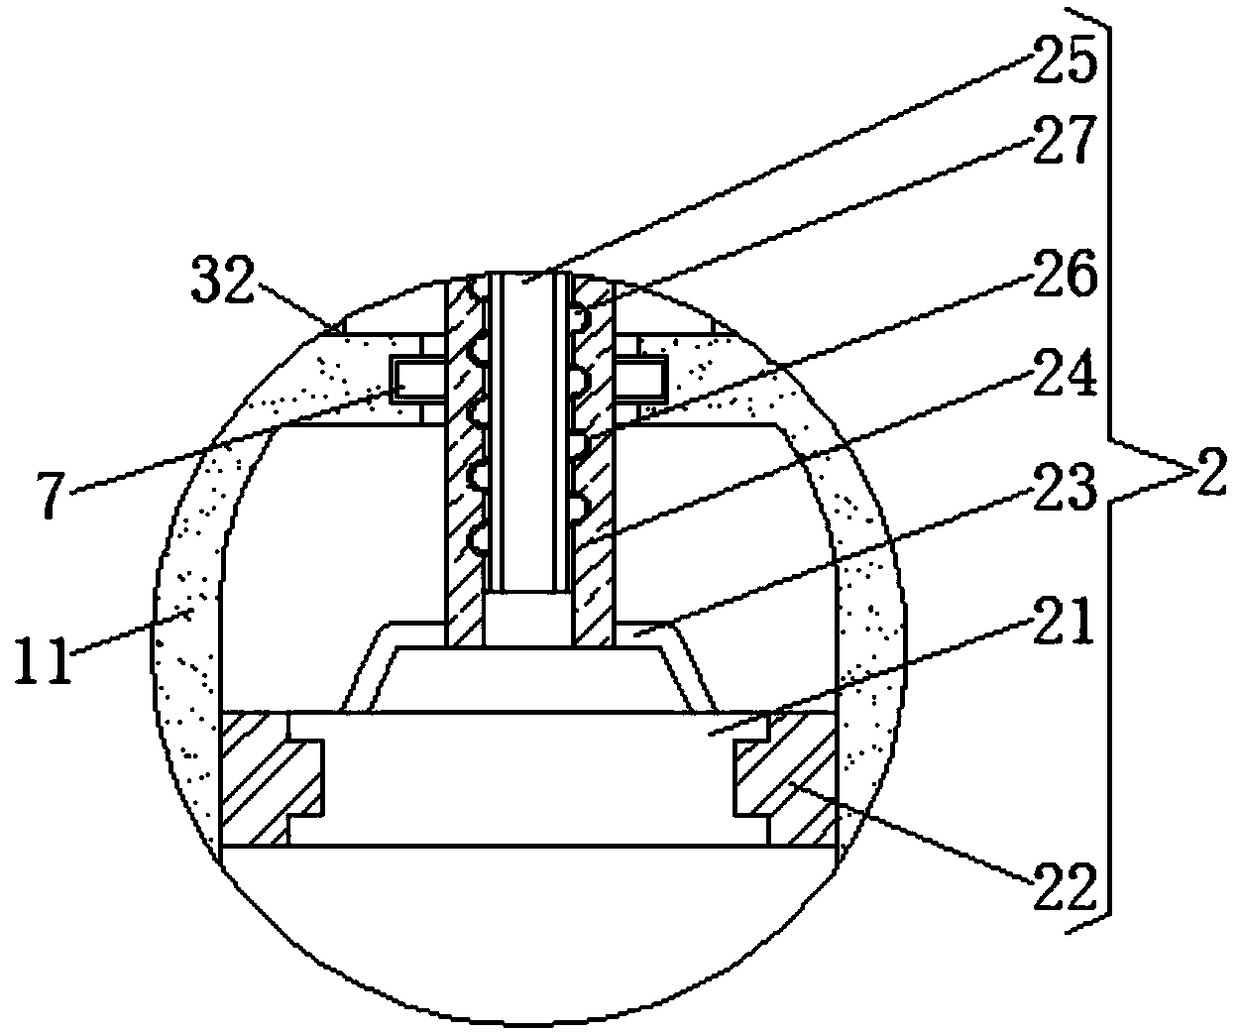 Pressing type ring-pull can compression device based on negative pressure contraction